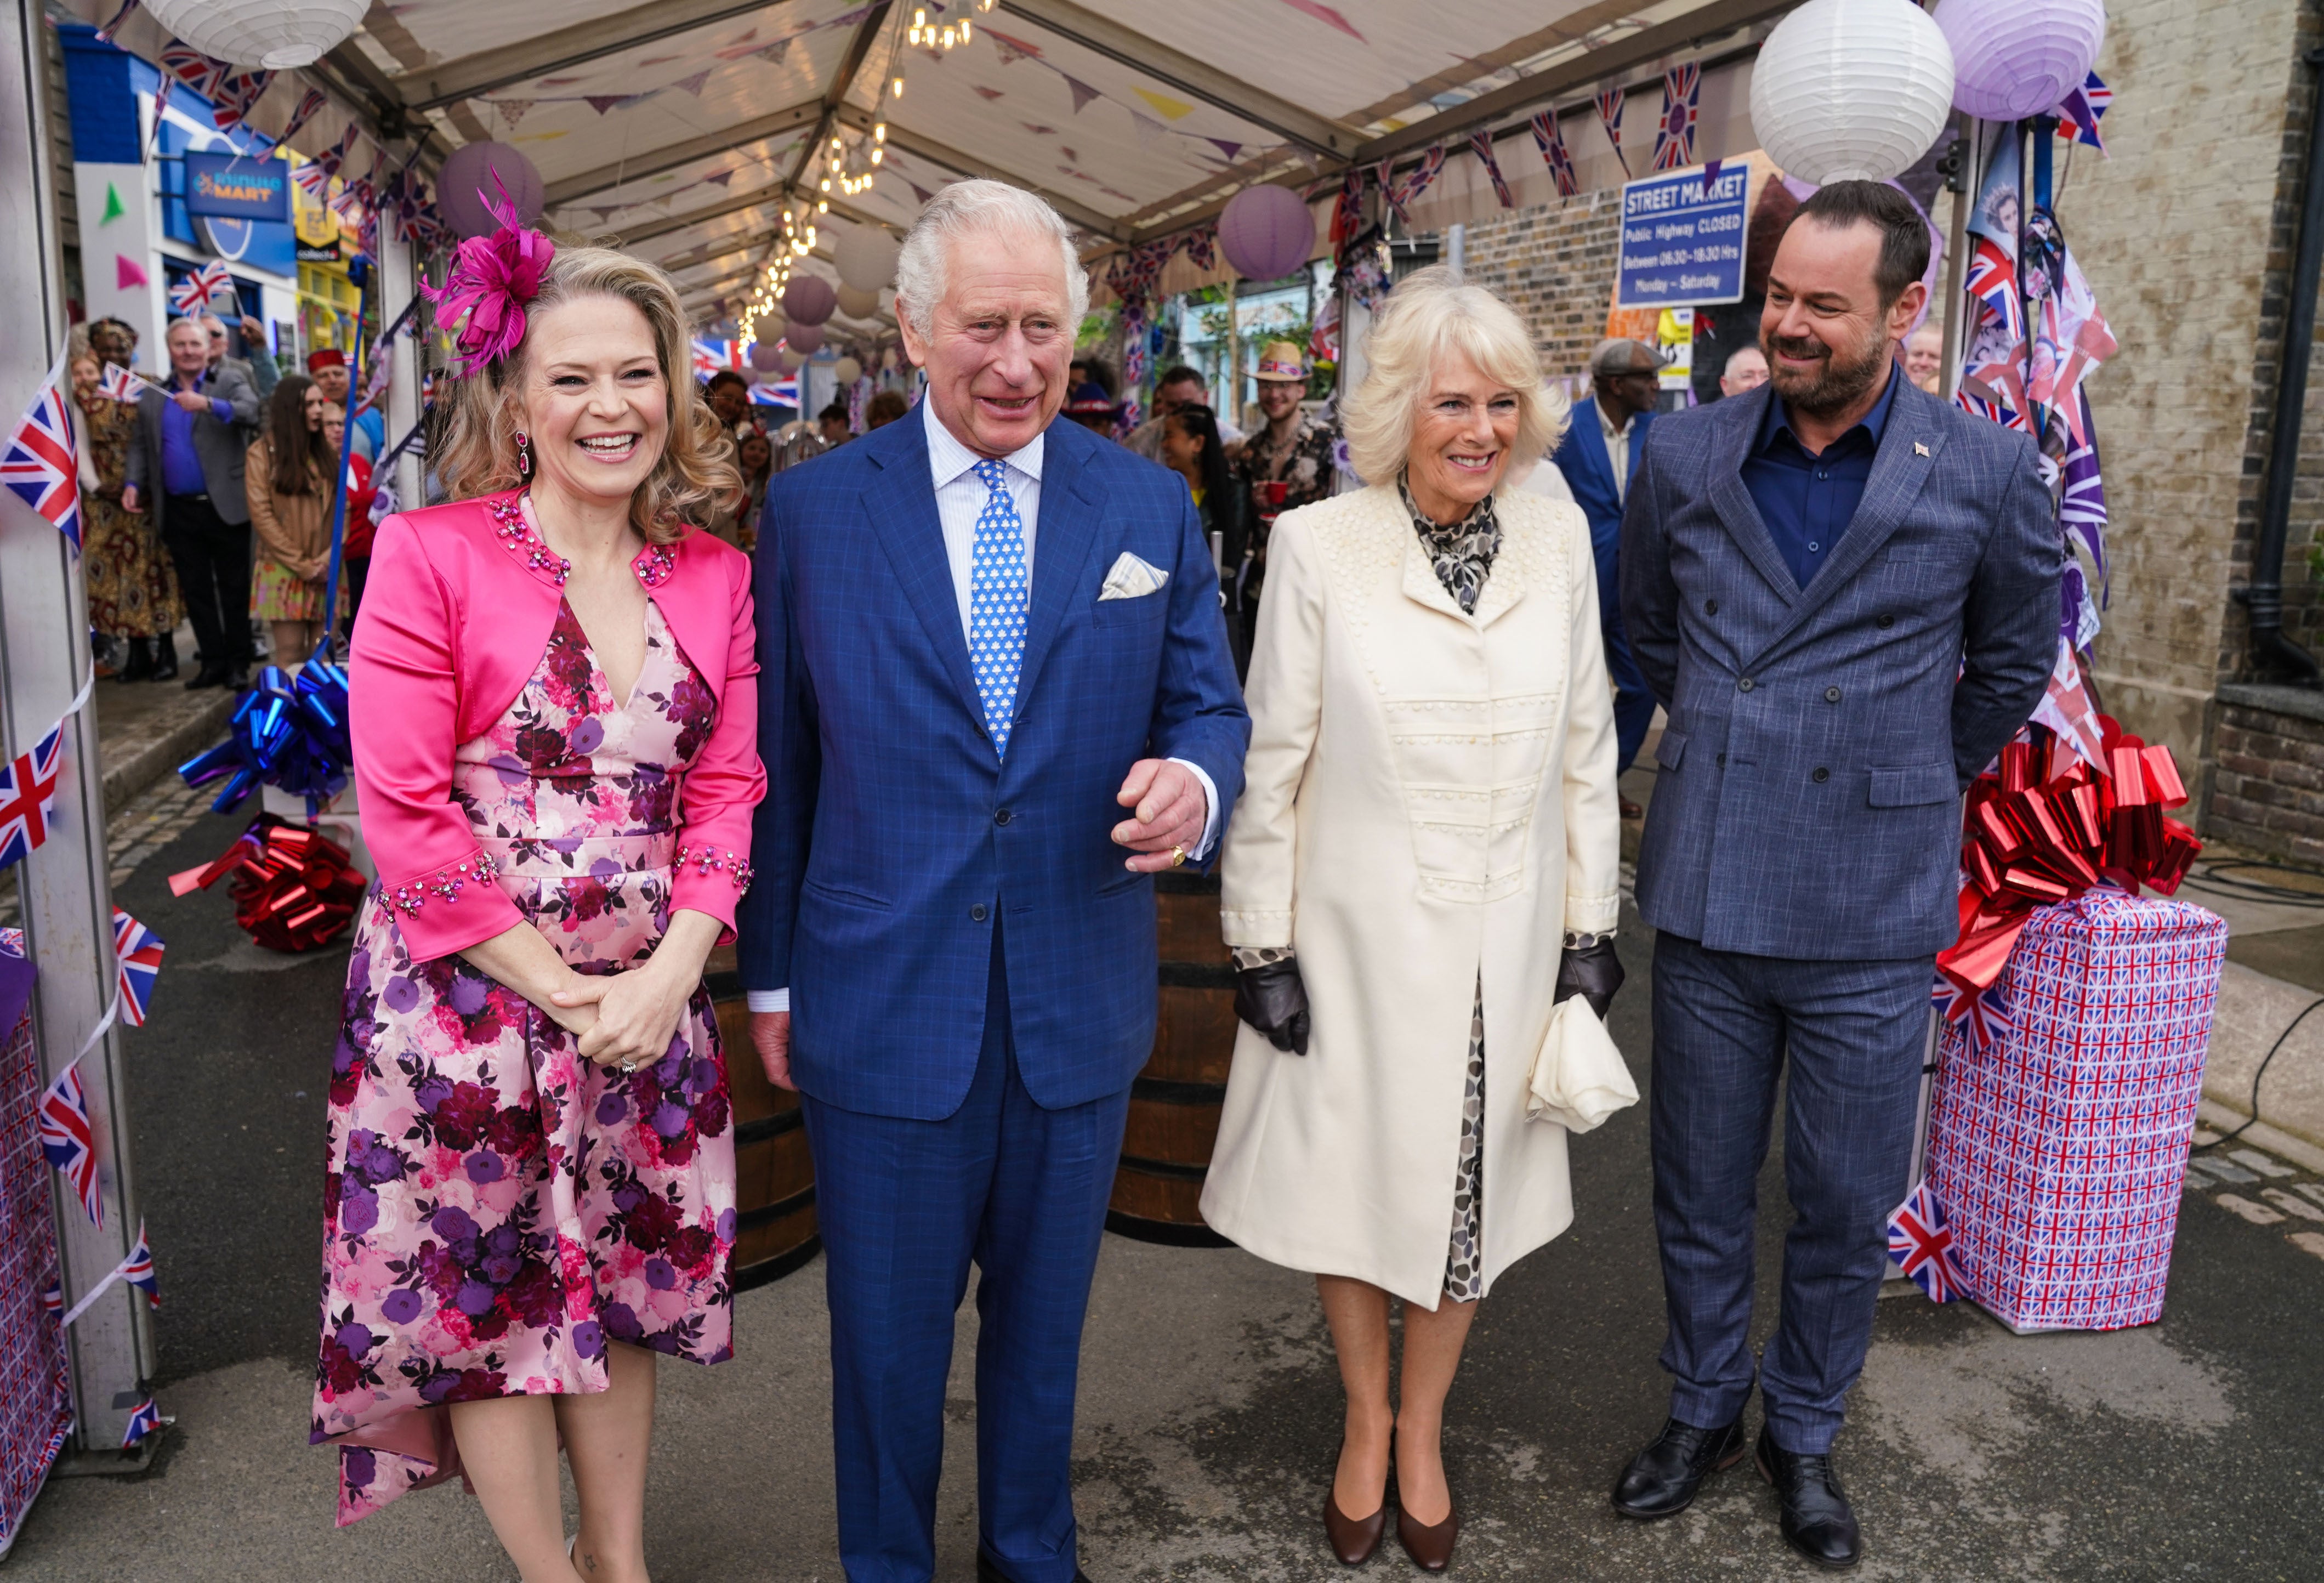 The scenes were filmed when Charles and Camilla visited the EastEnders set in March (BBC/PA)